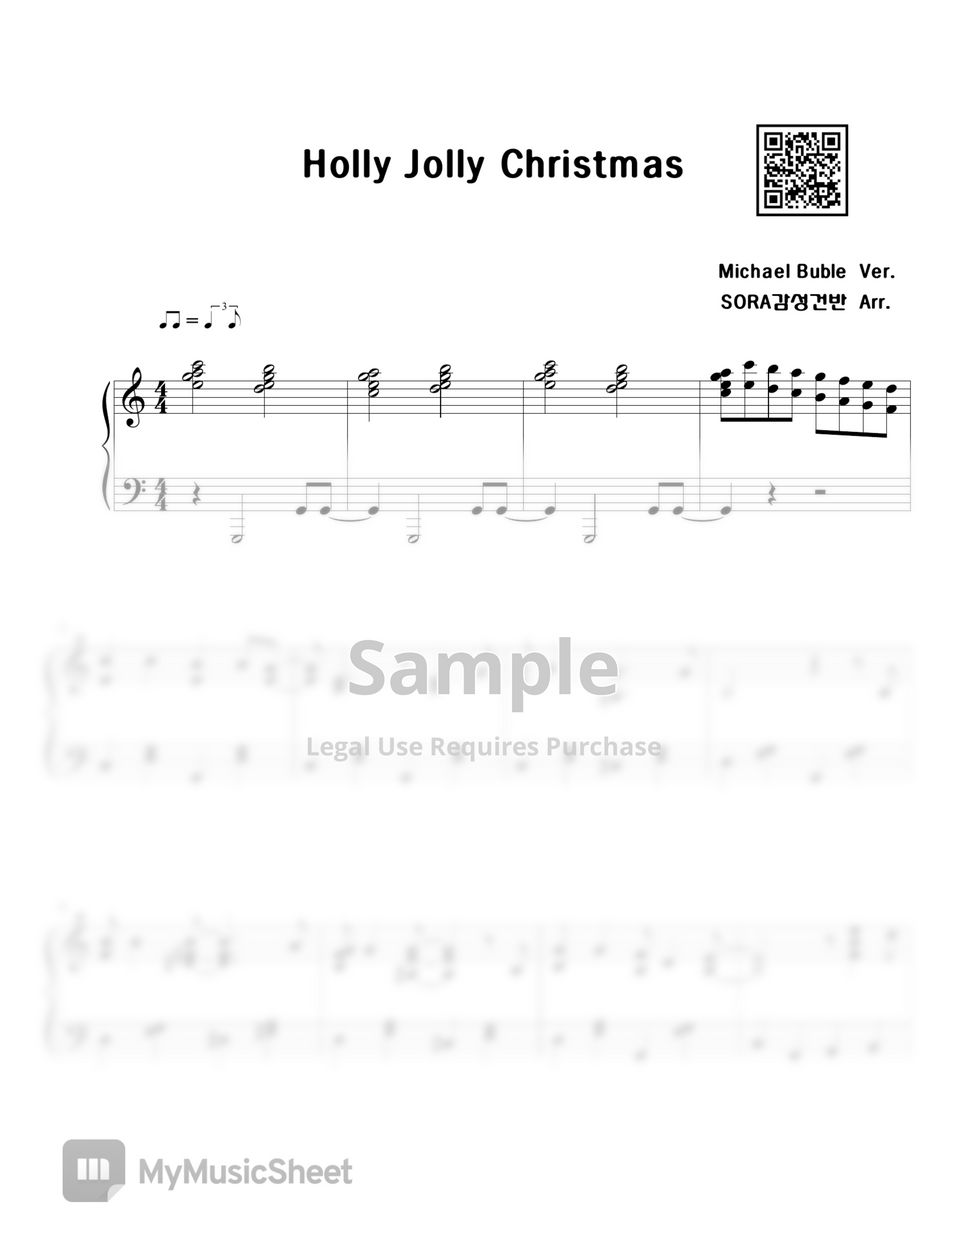 Michael Buble - Holly Jolly Christmas (Holly Jolly Christmas Michael Buble  piano cover / music sheet) by SORA감성건반